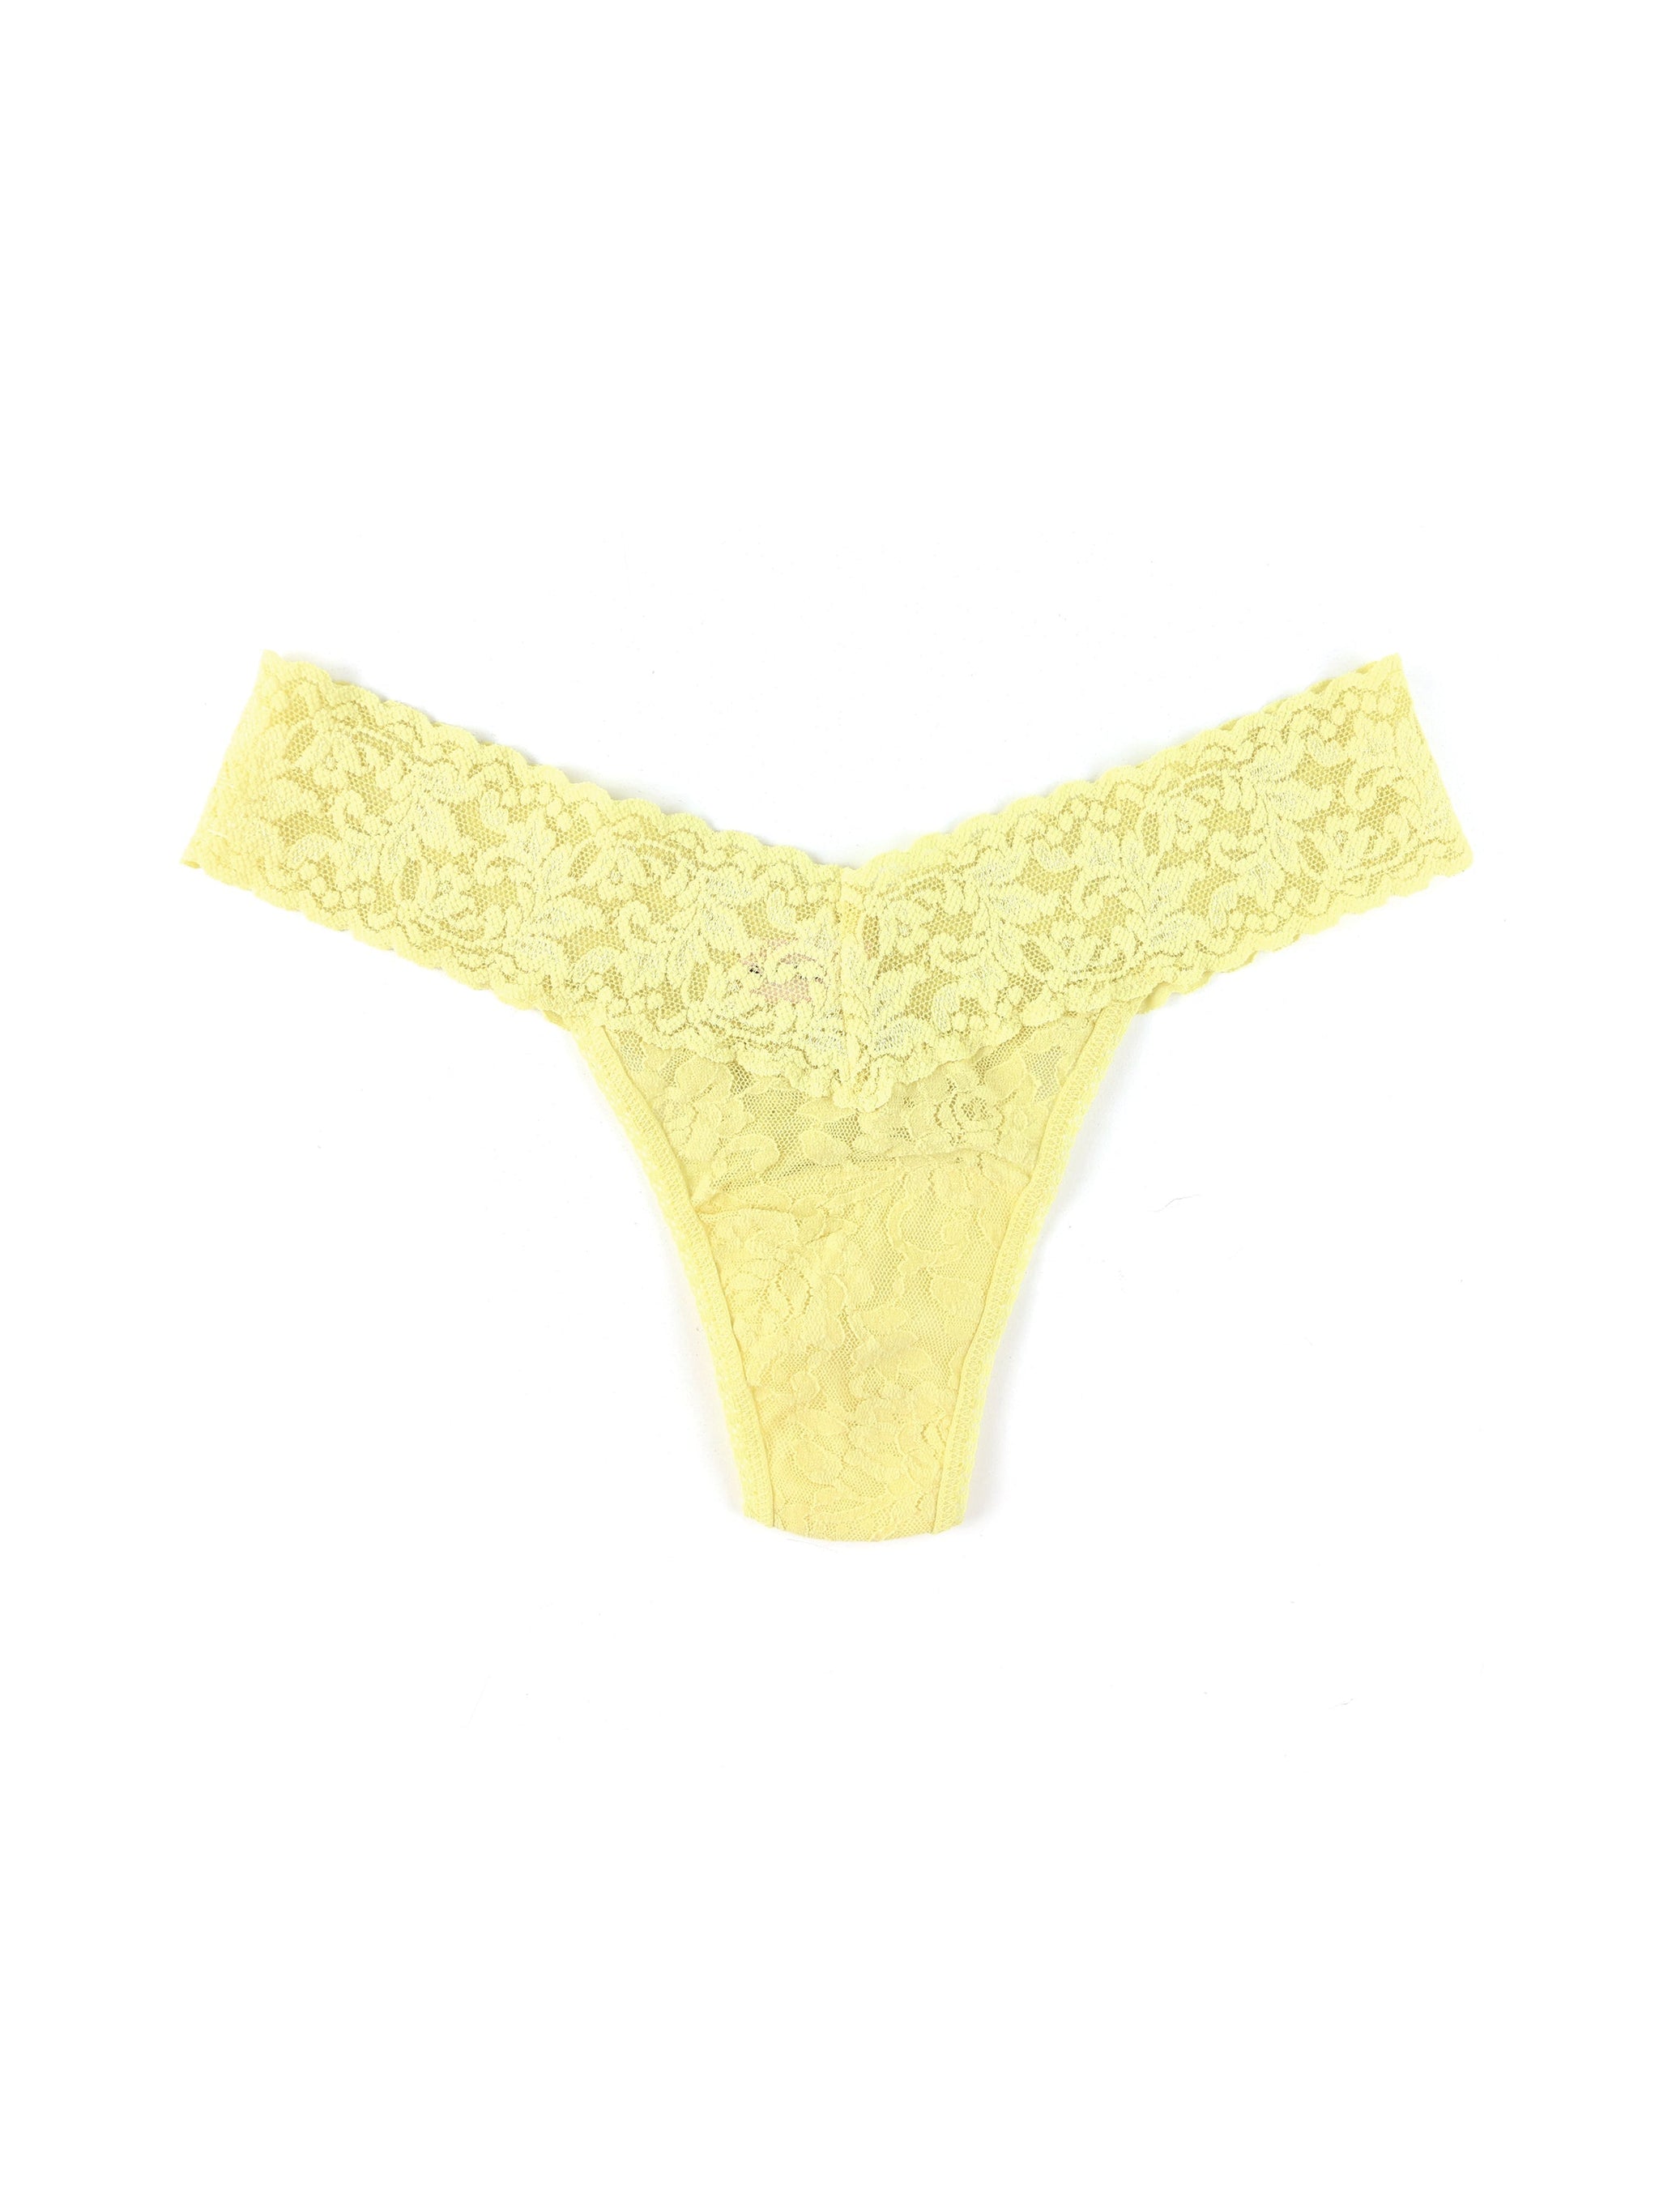 Petite Size Signature Lace Low Rise Thong Smile More Yellow